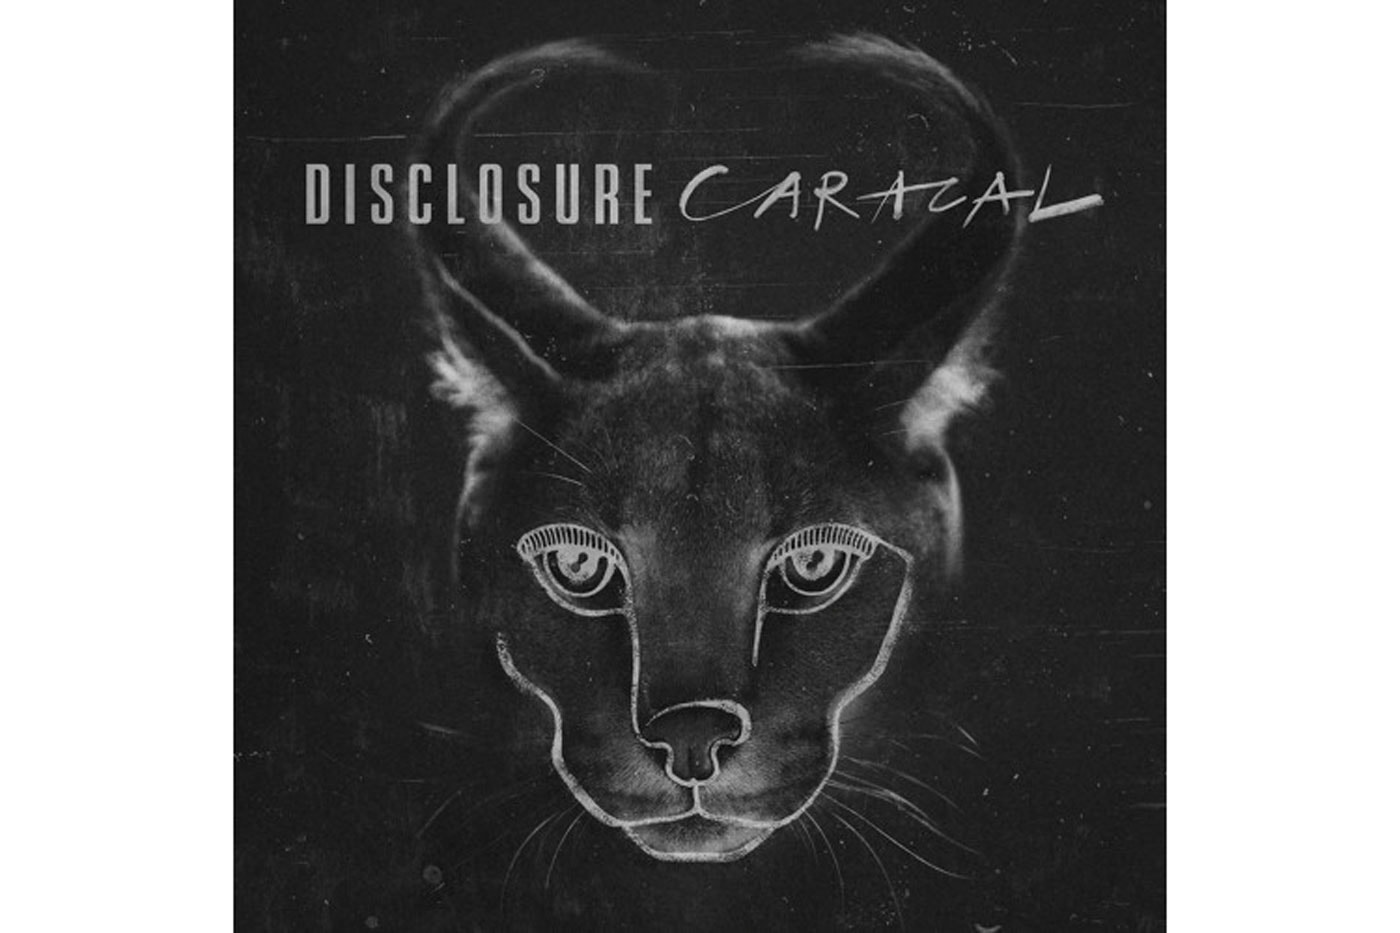 Listen to Disclosure's New Single, "Echoes"